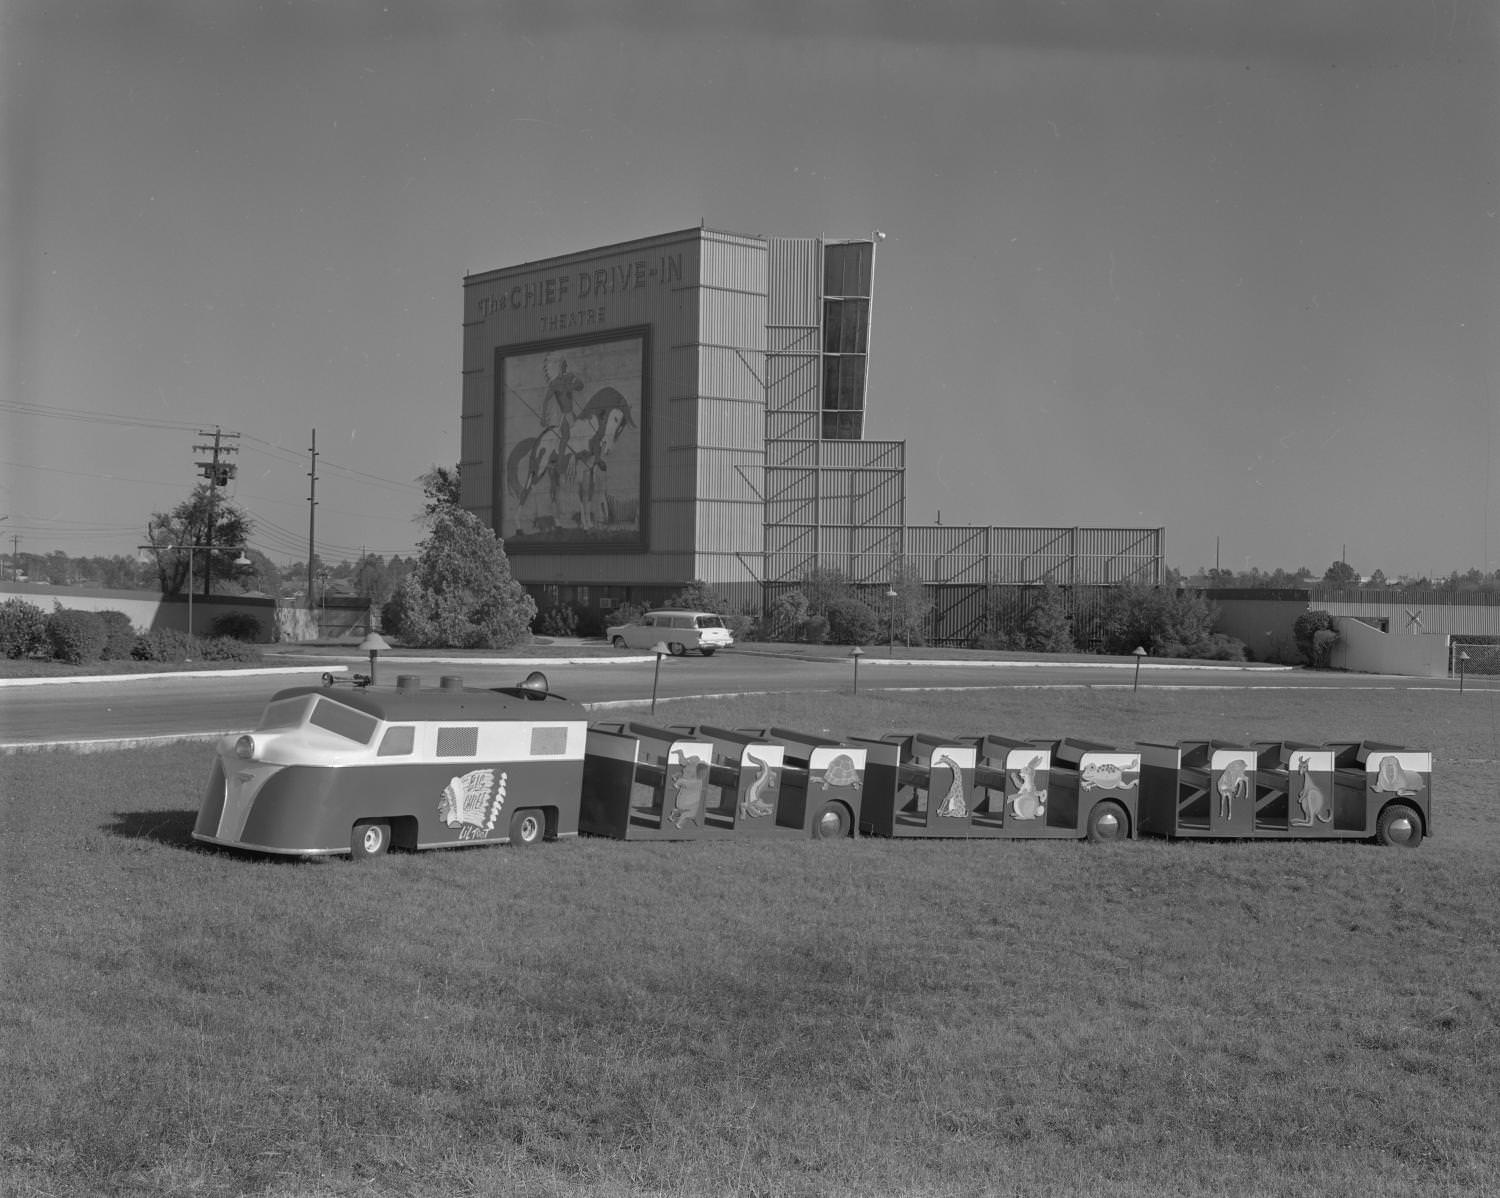 A mini children's' train parked in front of a Trans-Texas Theater that was located at 5601 North Lamar Boulevard, 1961